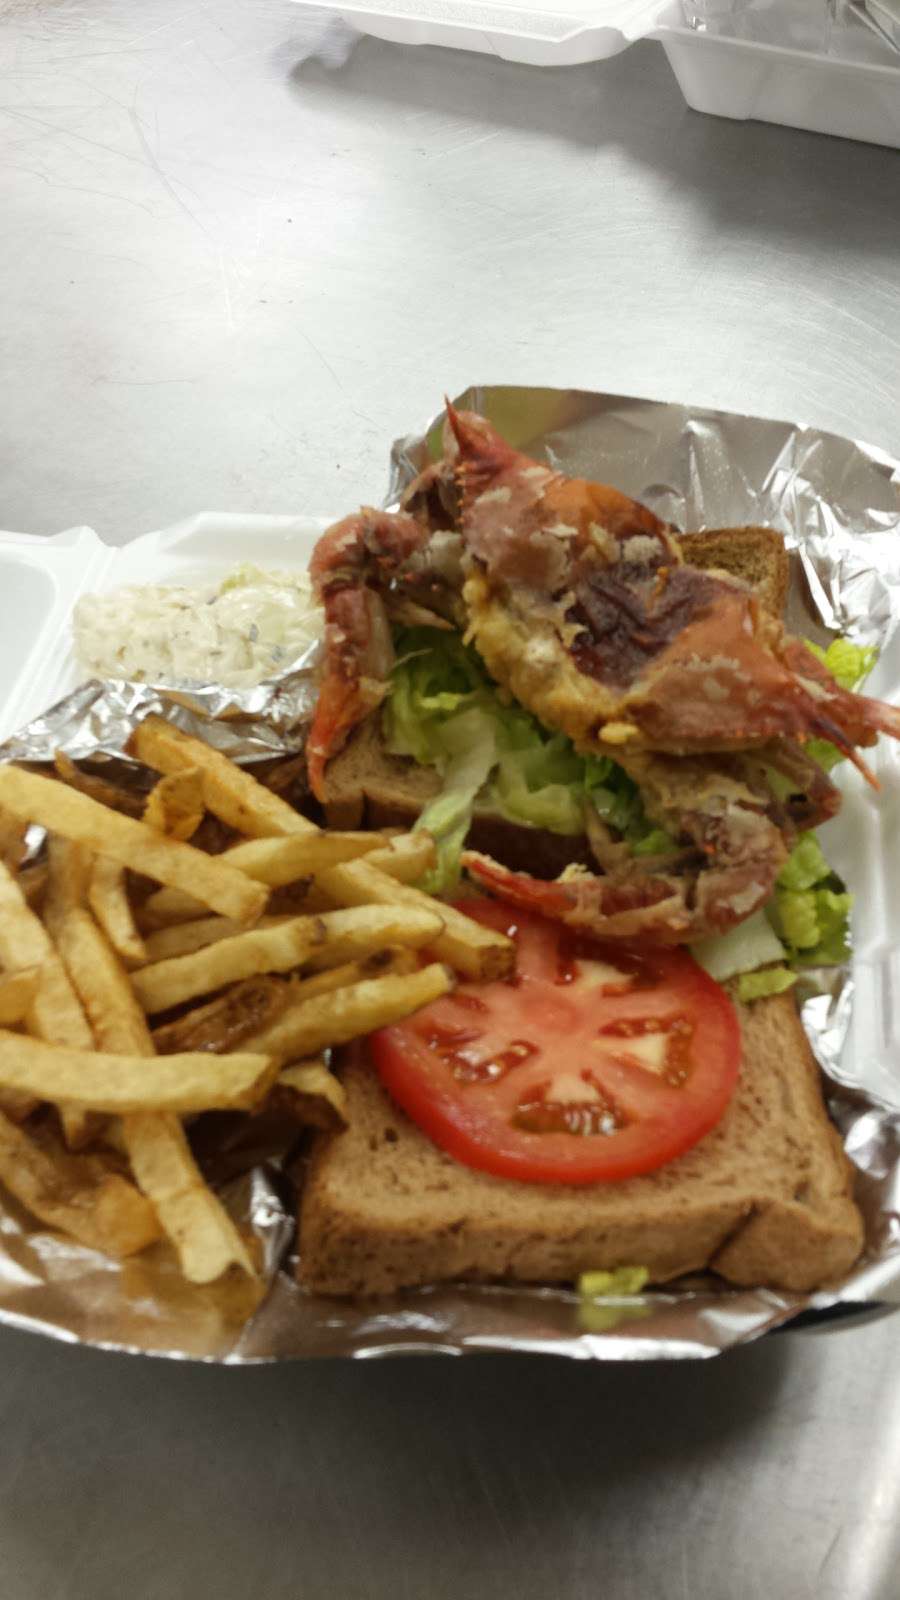 Freeland Crab and Seafood | 20235 Middletown Rd, Freeland, MD 21053 | Phone: (410) 357-9100